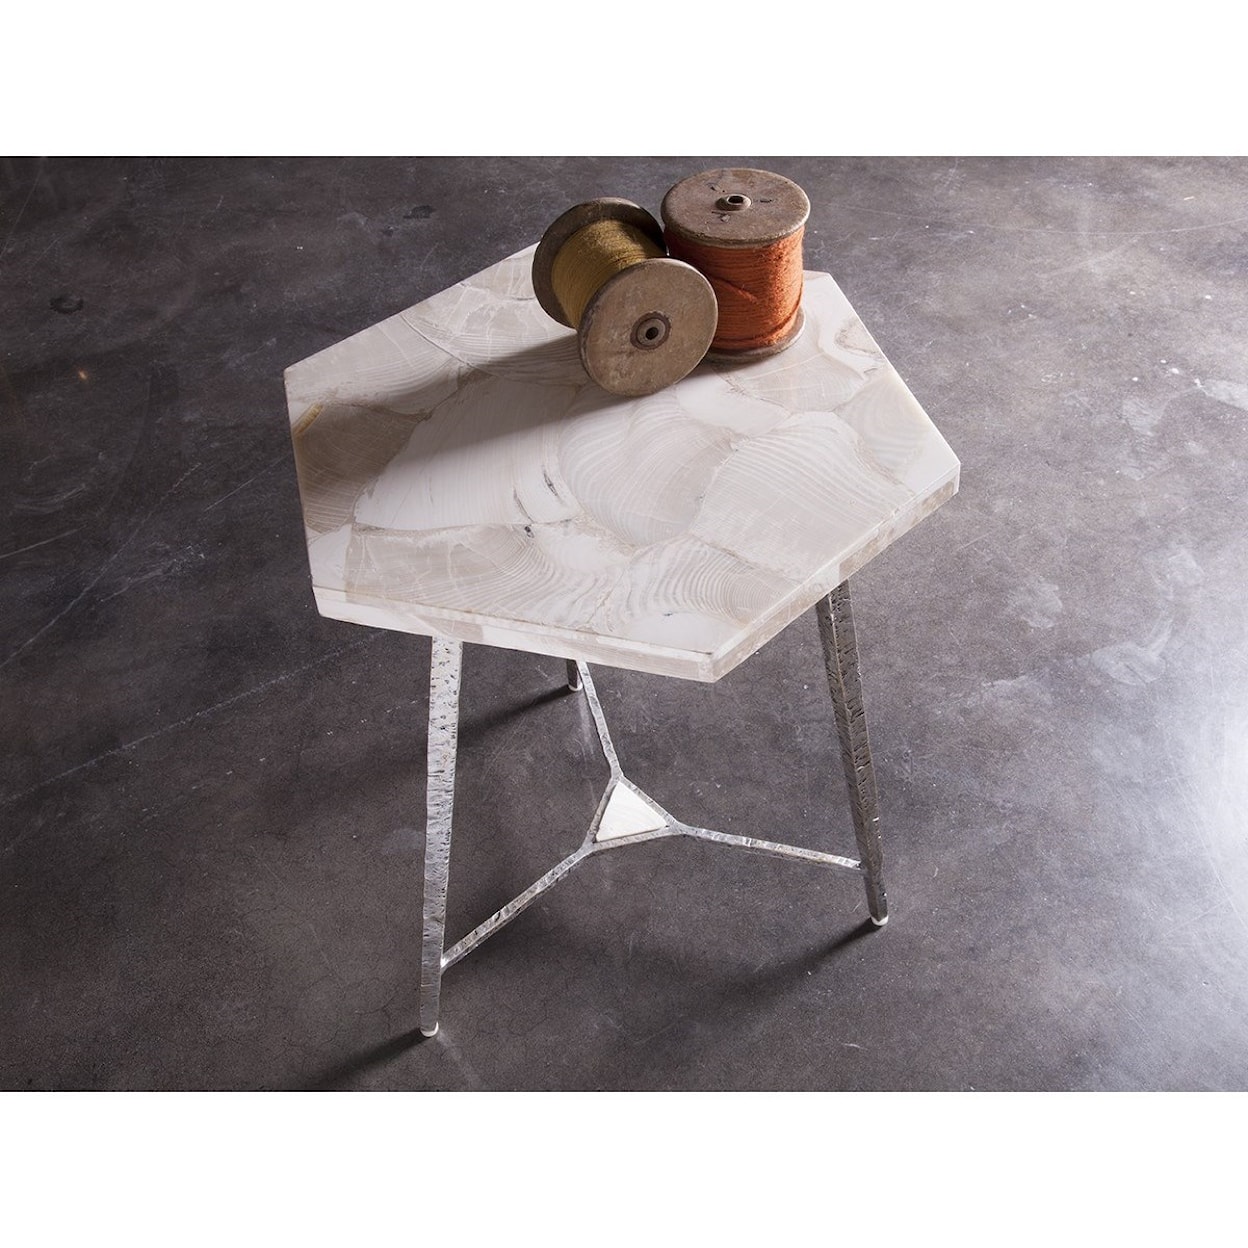 Artistica Gregory Chasen Spot Table